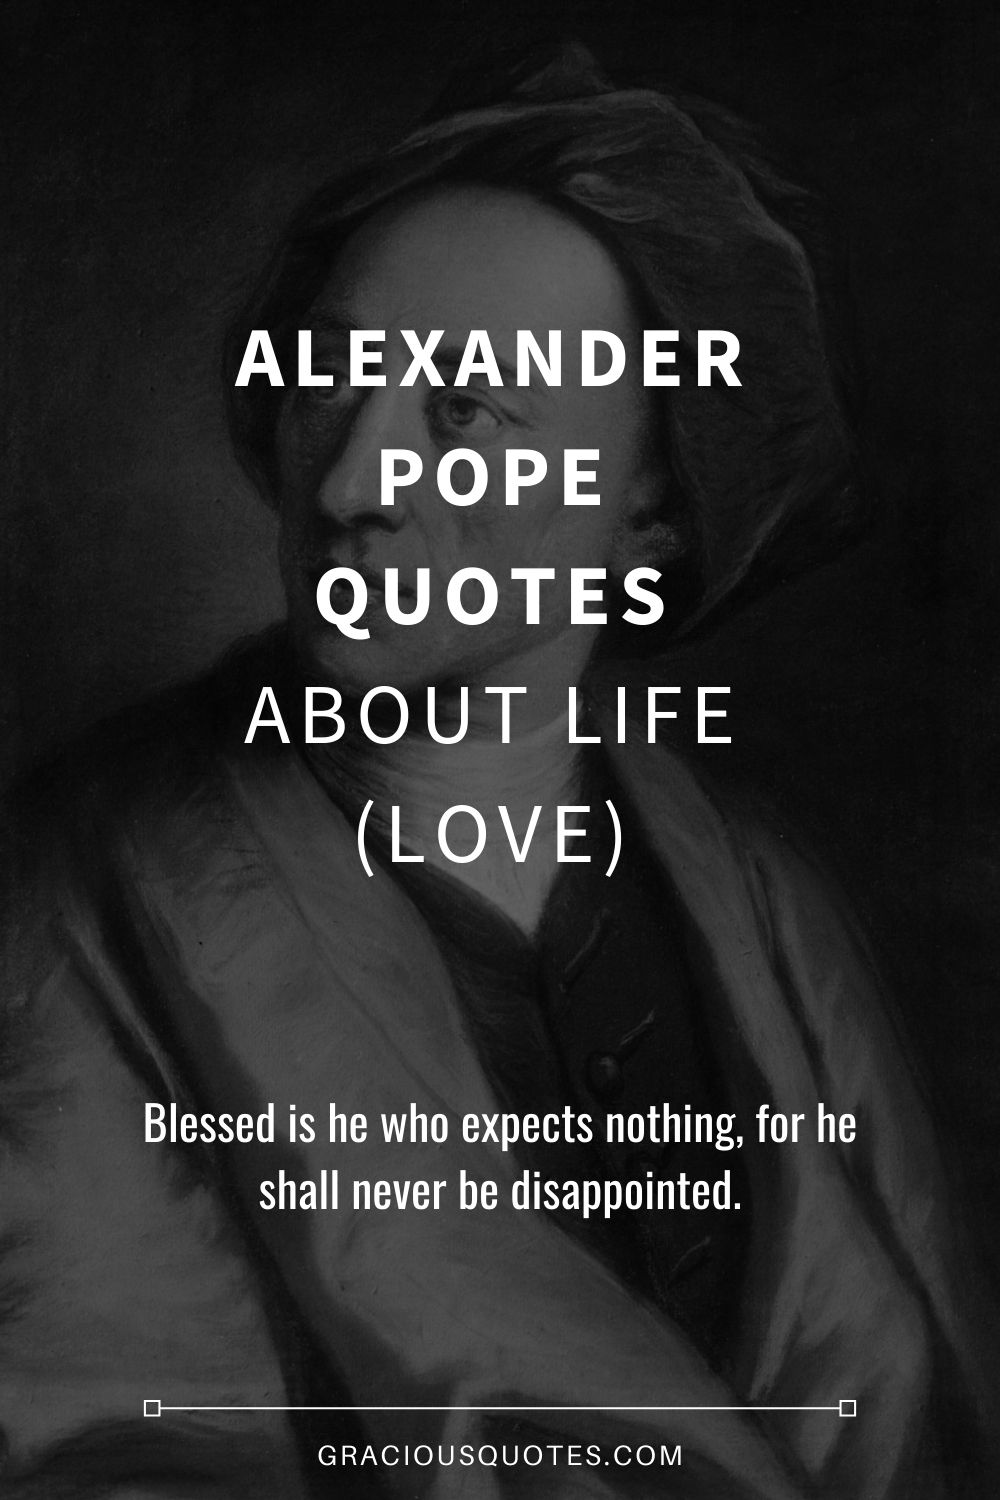 Alexander Pope Quotes About Life (LOVE) - Gracious Quotes